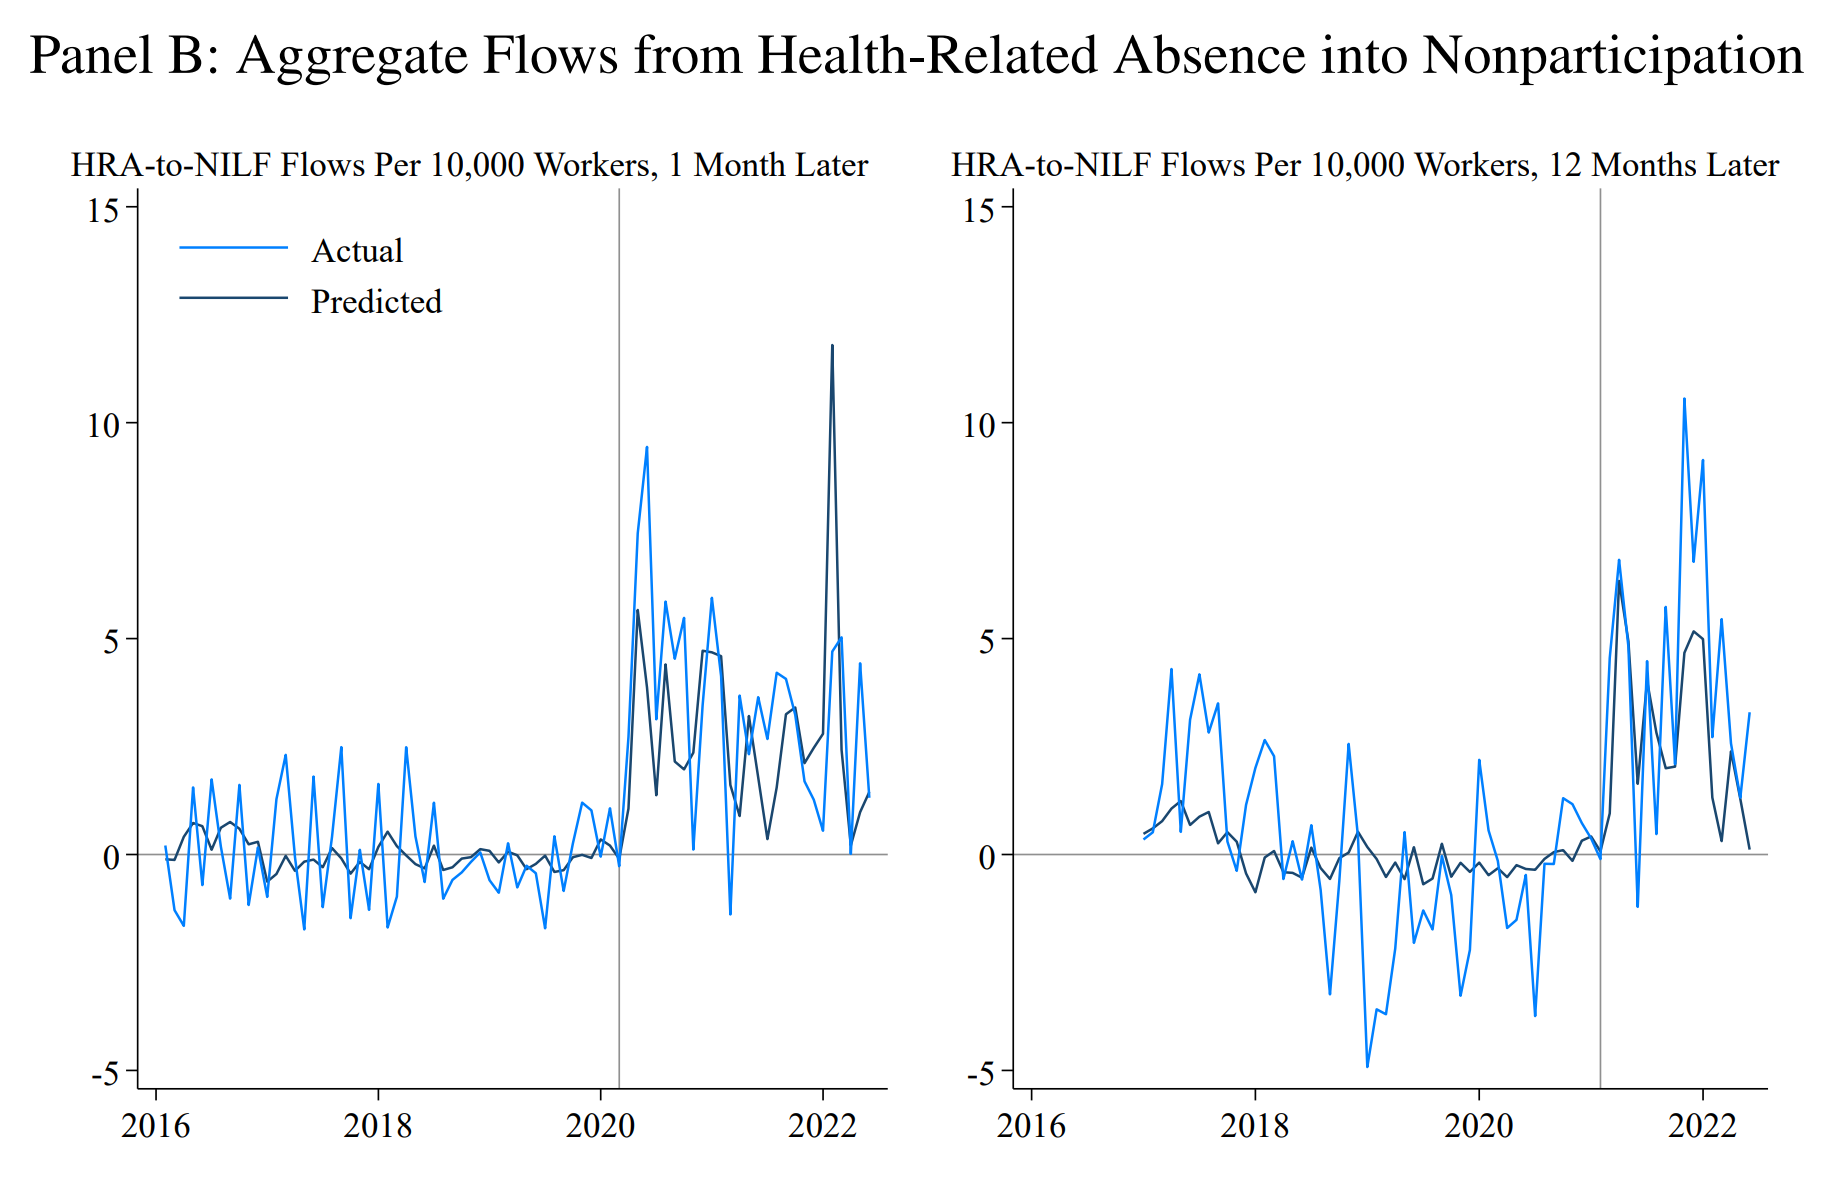 Aggregate Flows from Health-Related Absence into Nonparticipation, 2016-2022. The figure displays actual and predicted rates of nonparticipation following health-related absences per 10,000 people working one month ago or 12 months ago (“HRA-to-NILF” flows). Predicted rates of health-related nonparticipation are calculated using the rate of health-related absences and our event-study estimates of the effect of a health-related absence. All lines are adjusted for seasonality using pre-pandemic month fixed effects. Vertical lines identify when flows could be affected by the pandemic. Graphic: Goda and Soltas, 2022 / NBER